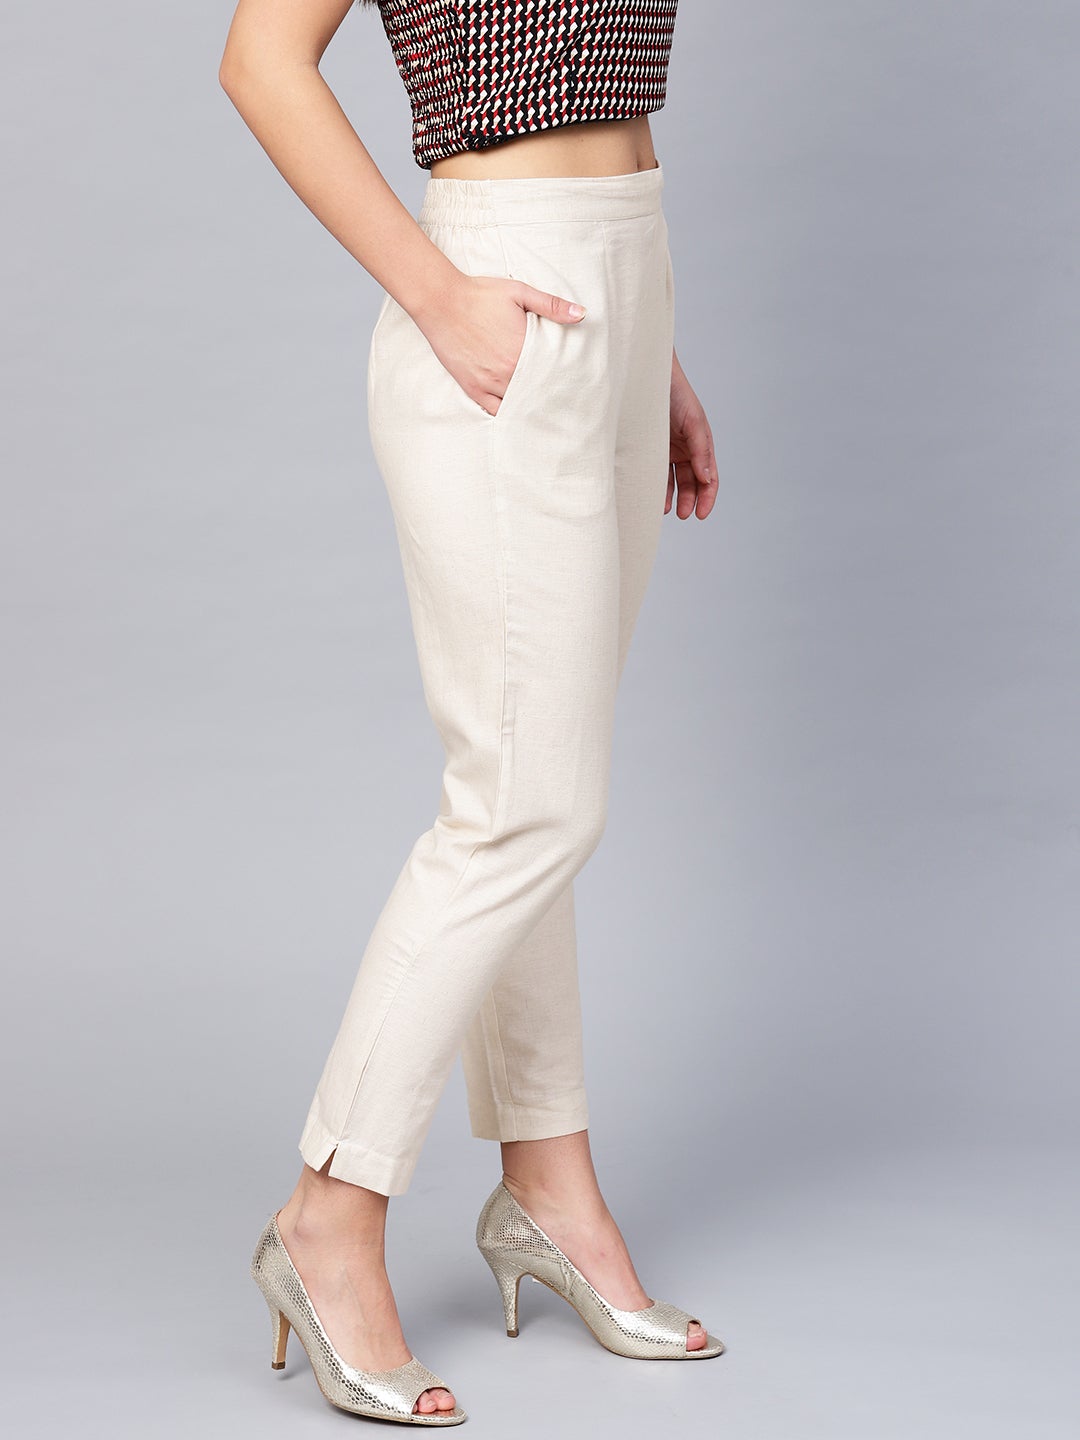 Linen off white printed cigrette pant for Woman